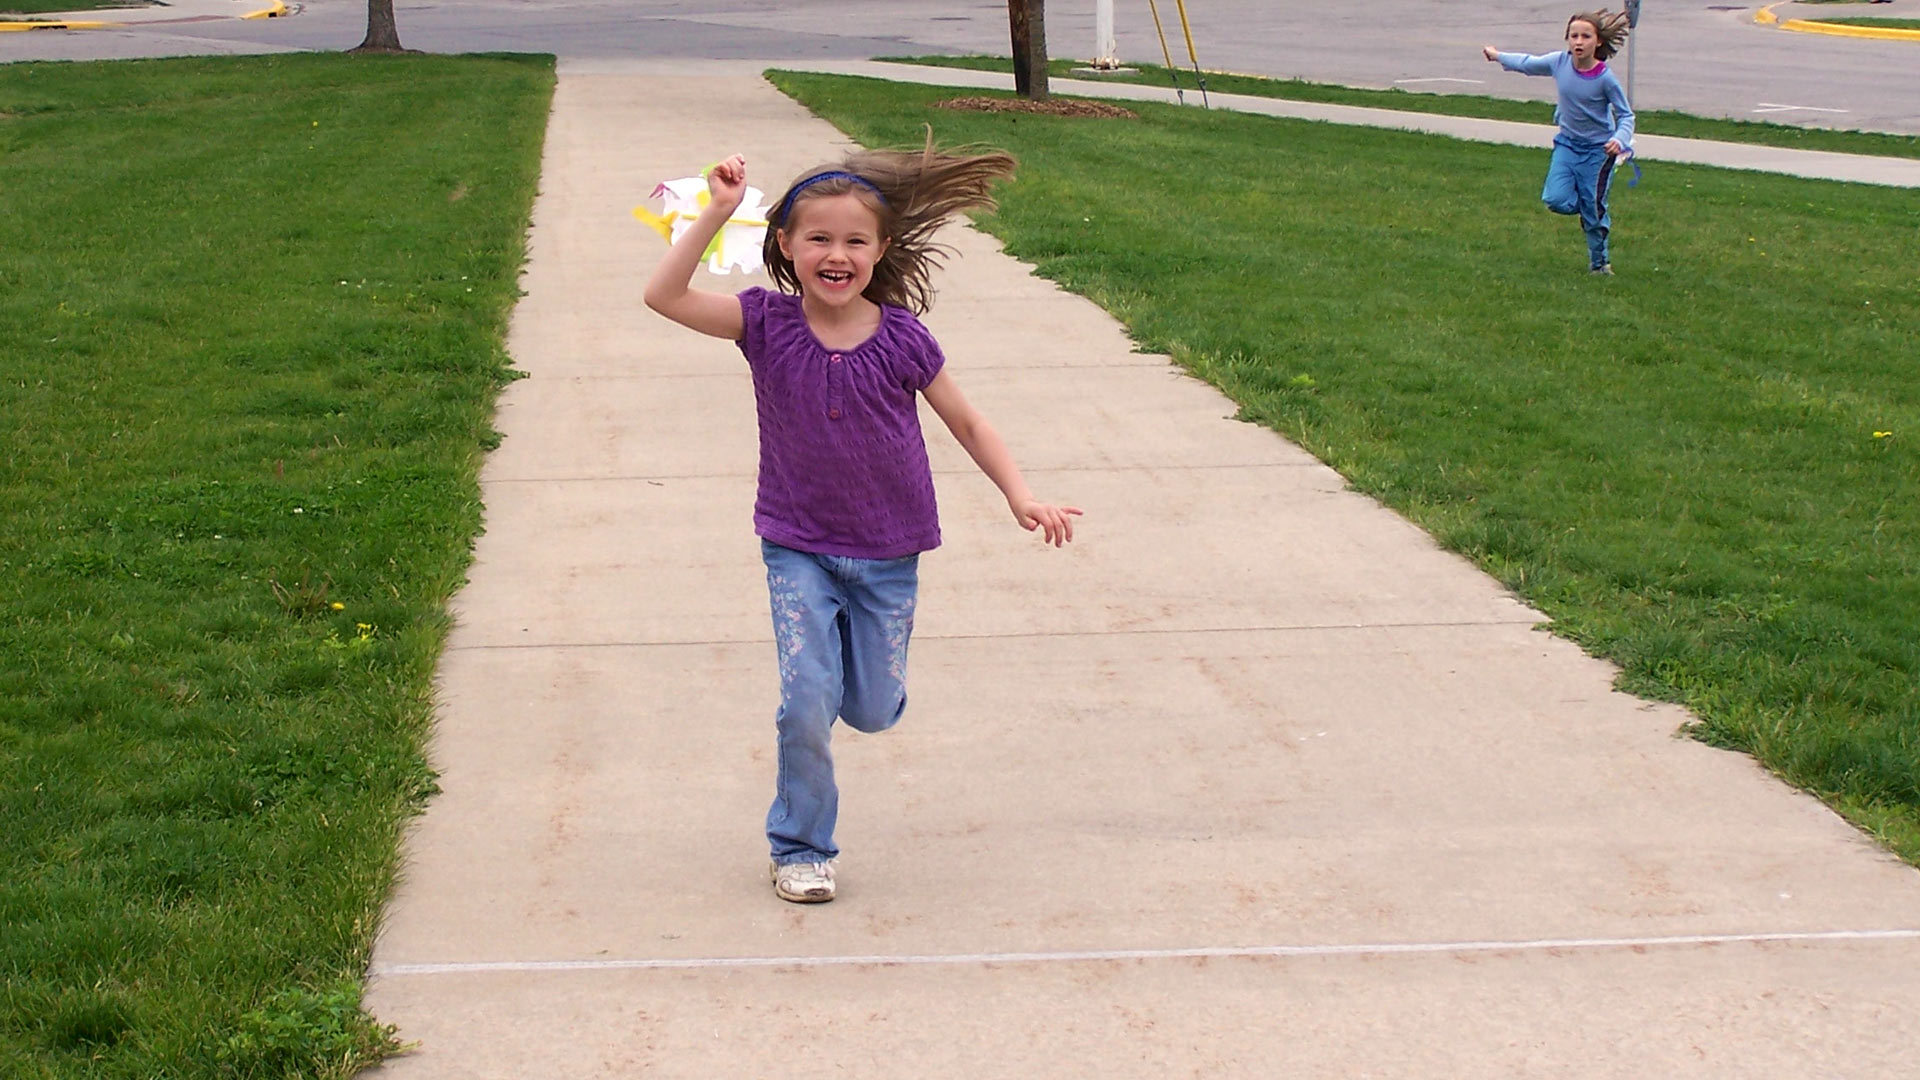 Enthusiastic child running outdoors towards you with a kite catching wind